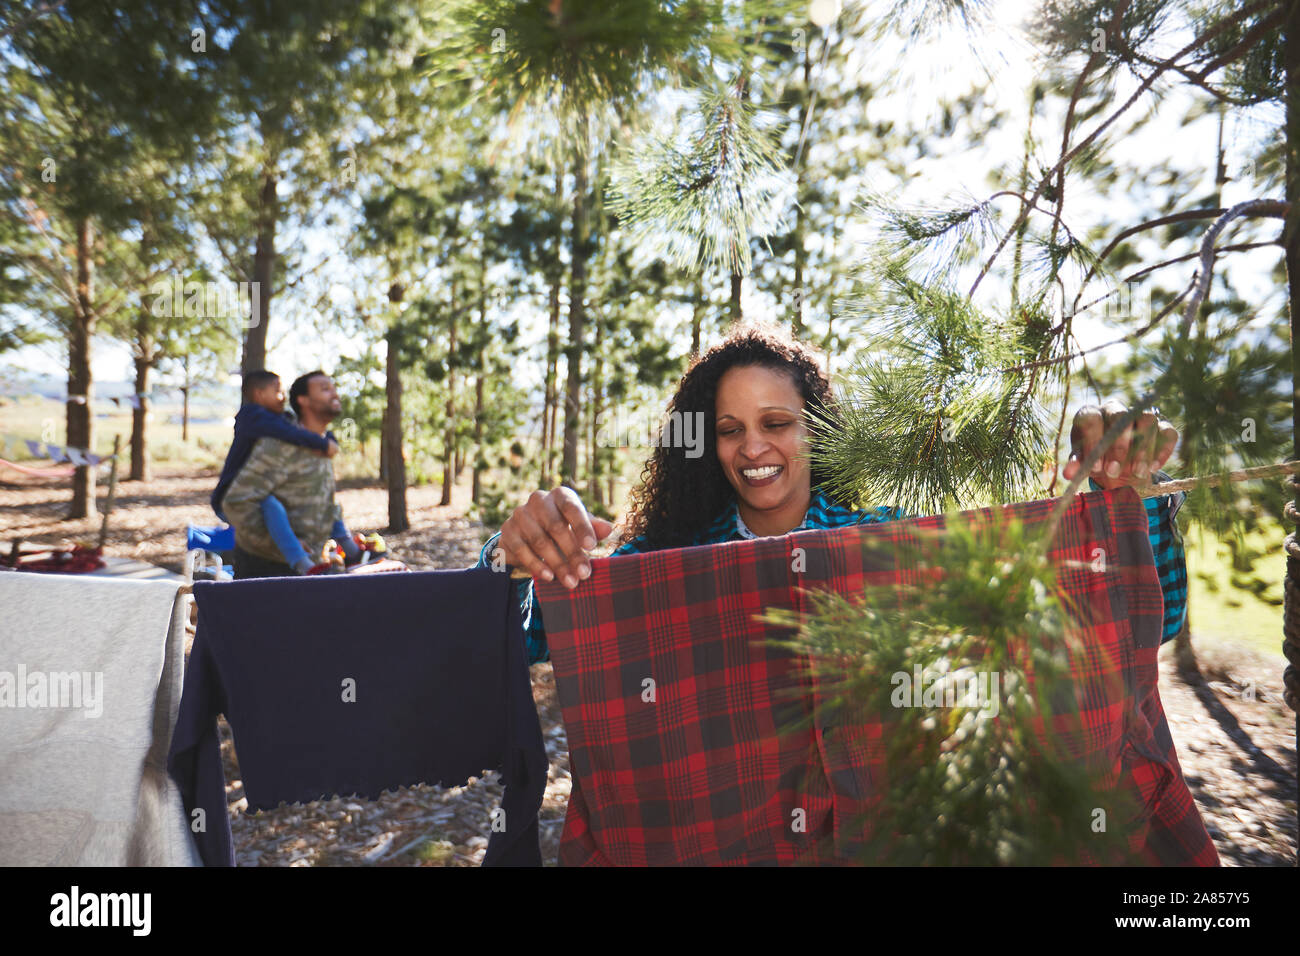 Smiling woman hanging clothing on campsite clothesline in woods Stock Photo